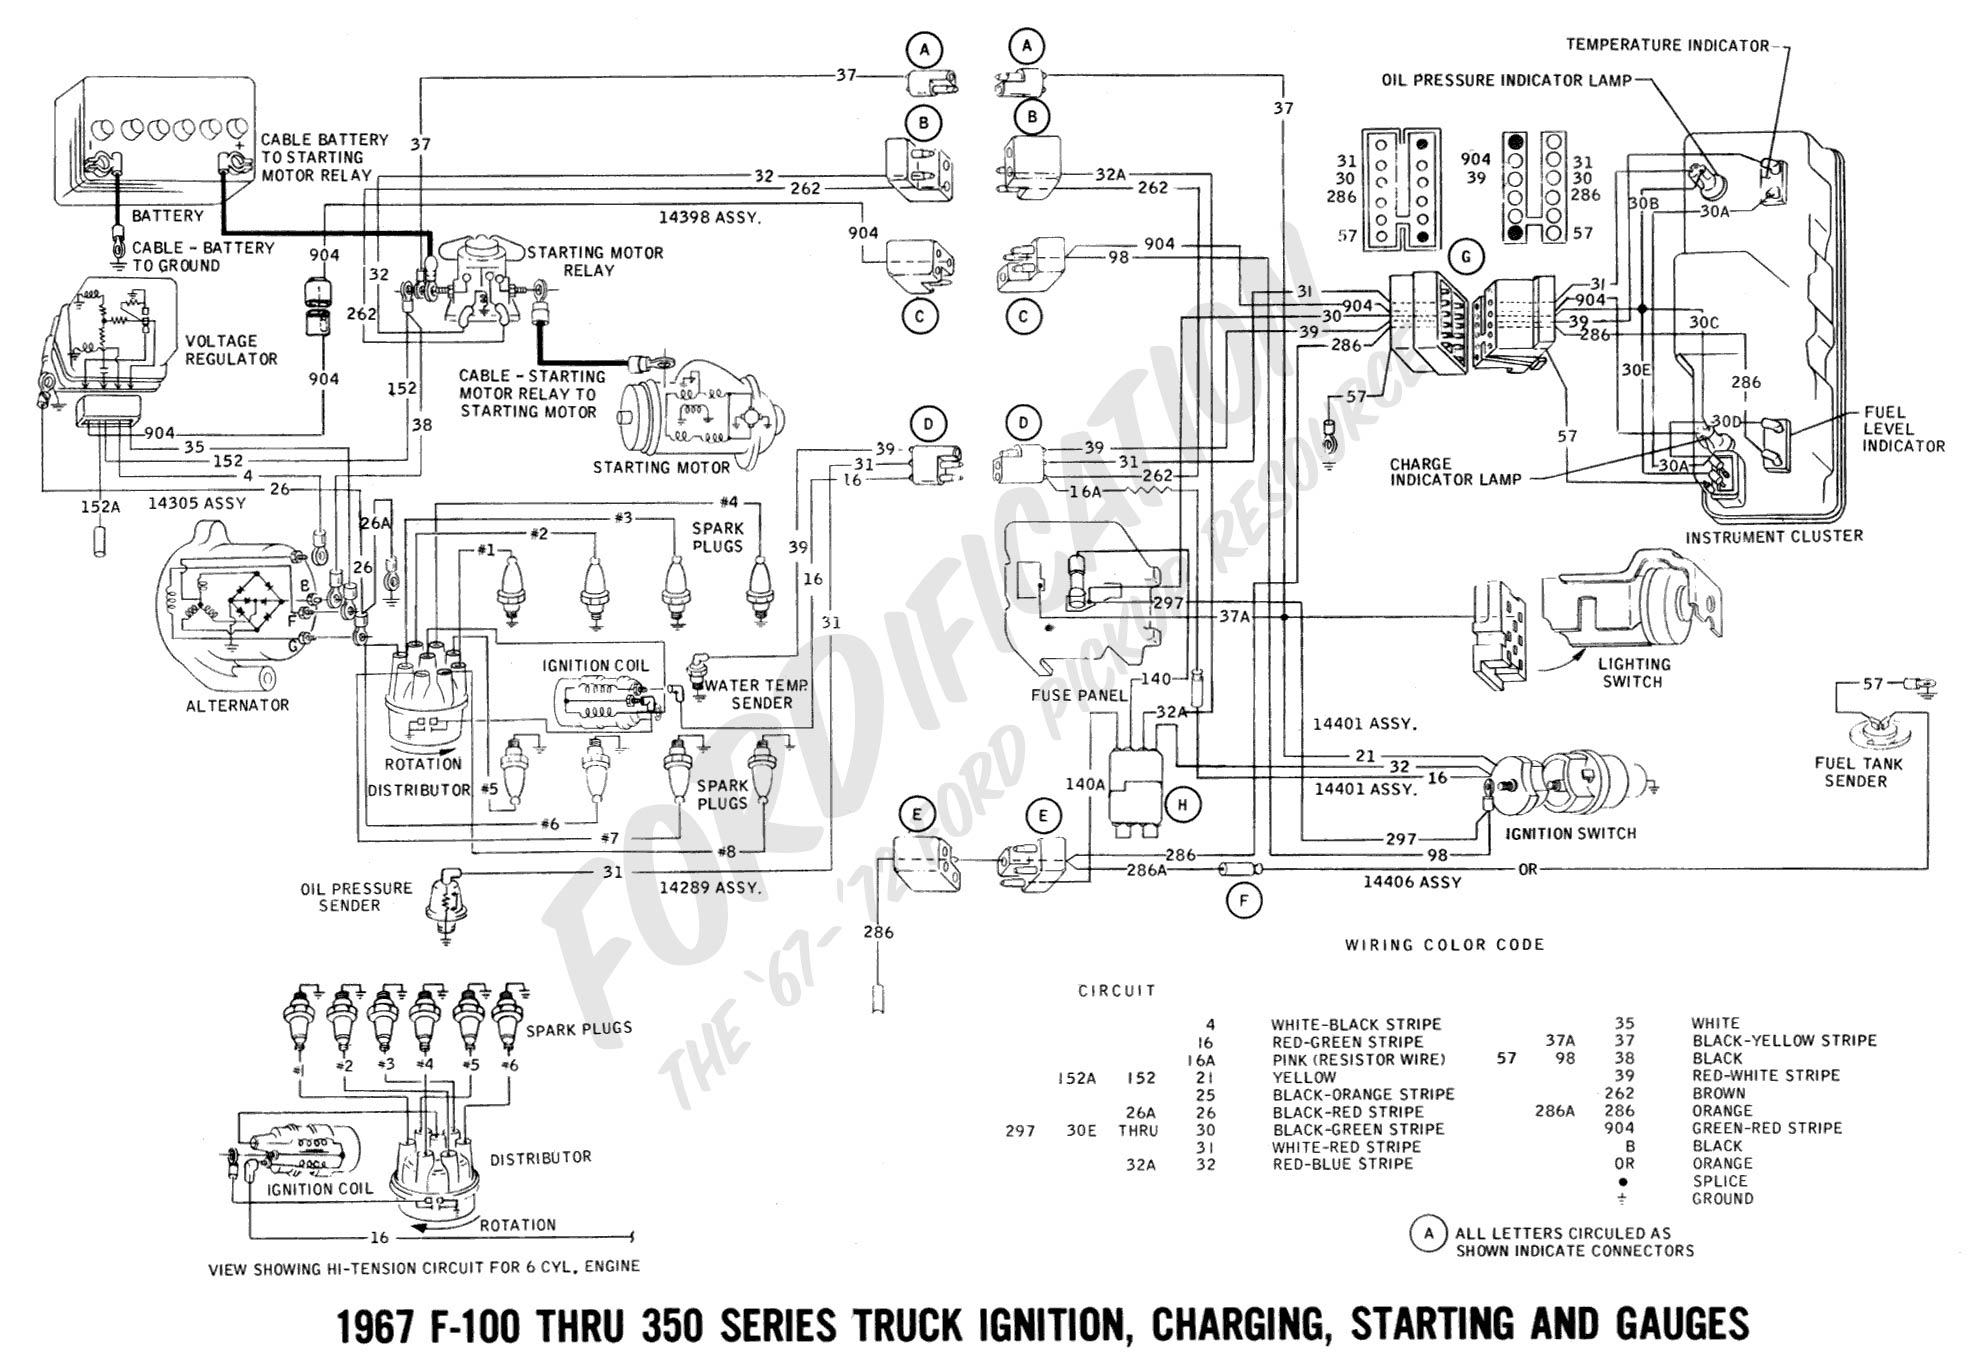 Ford Truck Technical Drawings and Schematics - Section H - Wiring Diagrams  1970 Ford F350 Wiring Diagram    FORDification.com